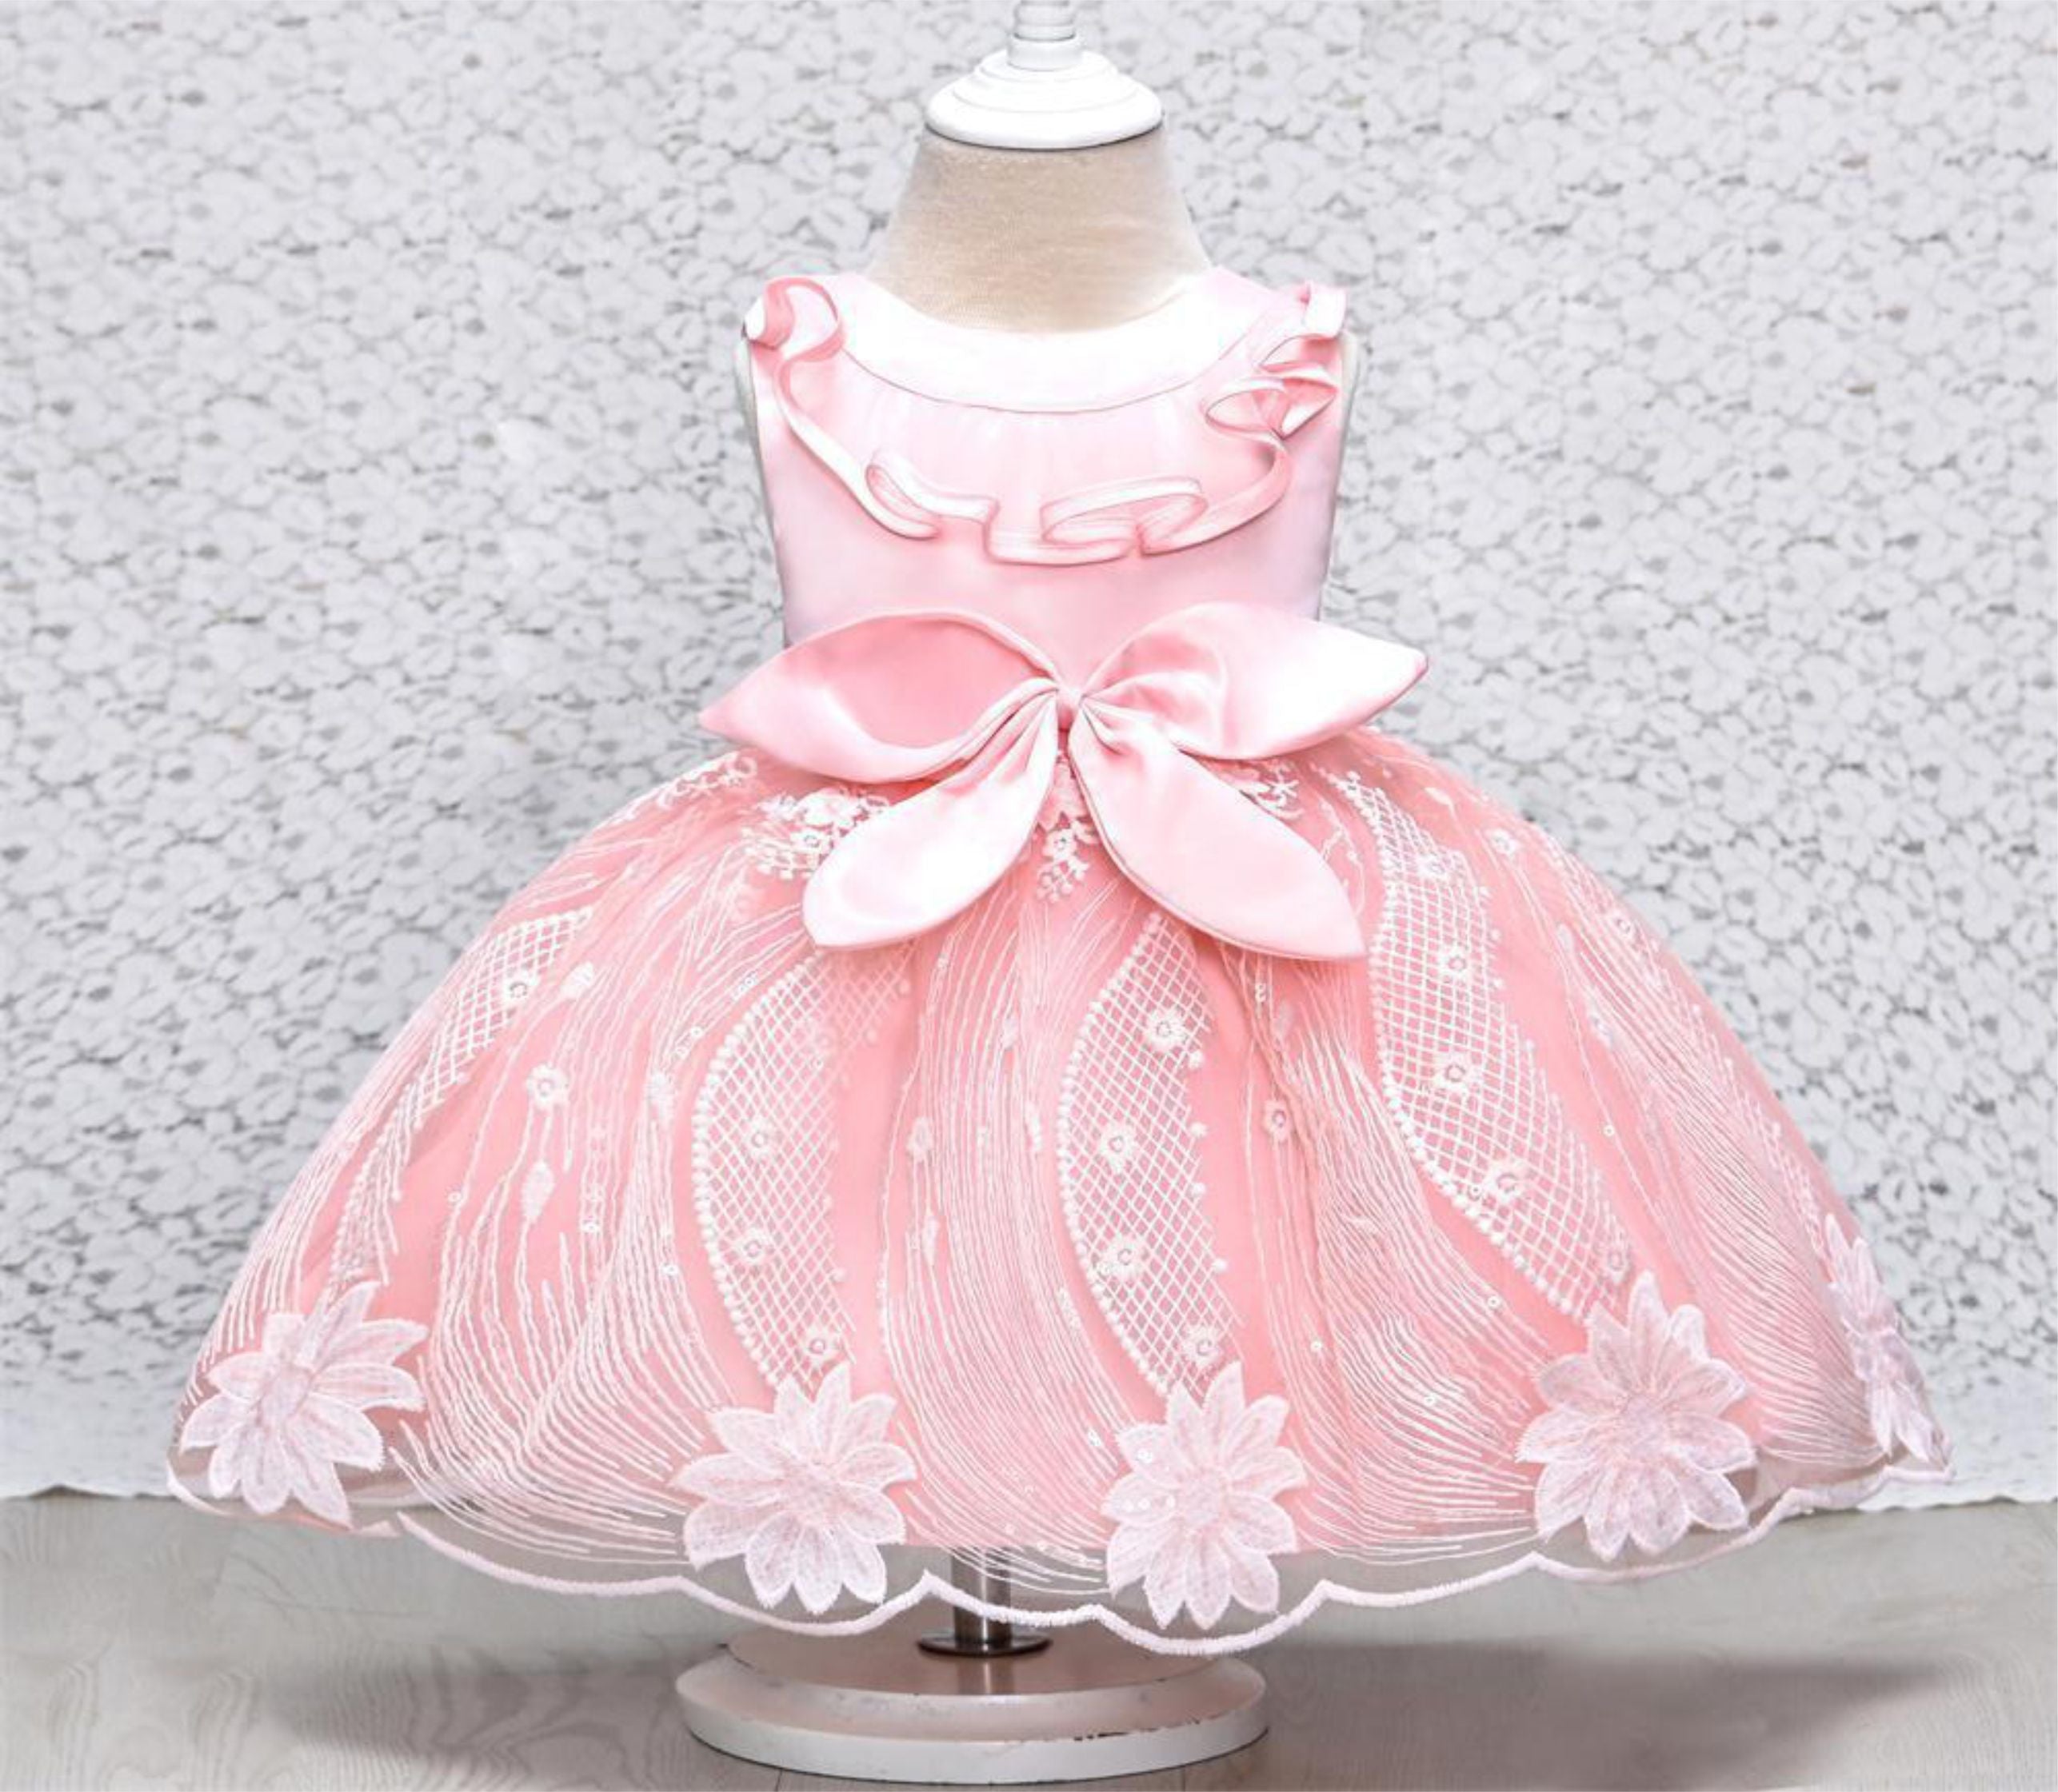 Wholesale New Cute dress child girl knee length mesh flower gown for girls  trailing baby girl birthday dresses for 3 years old From malibabacom